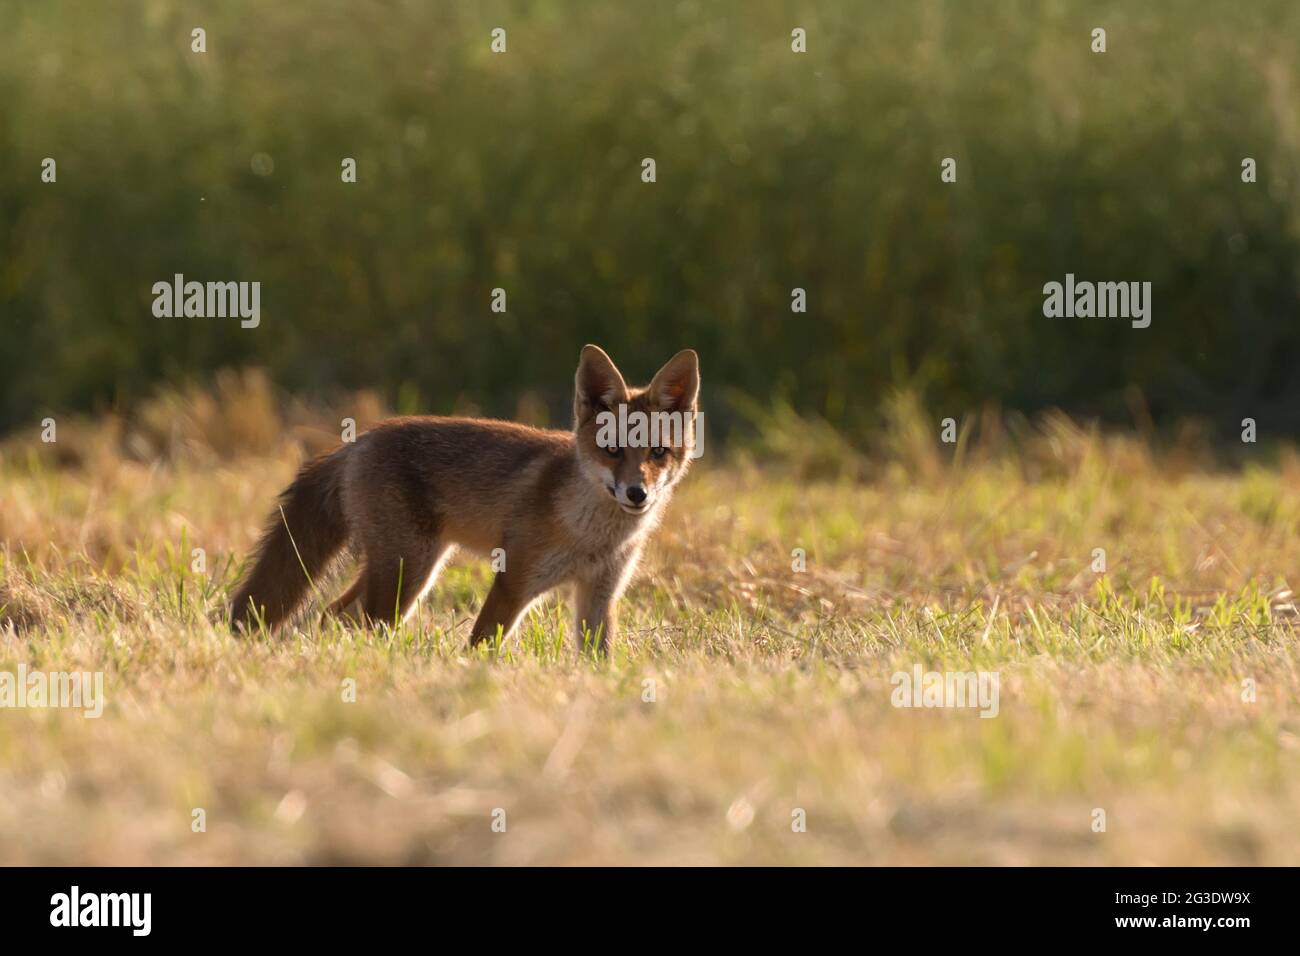 The red fox (Vulpes vulpes) is the largest of the true foxes and one of the most widely distributed members of the order Carnivora, being present acro Stock Photo